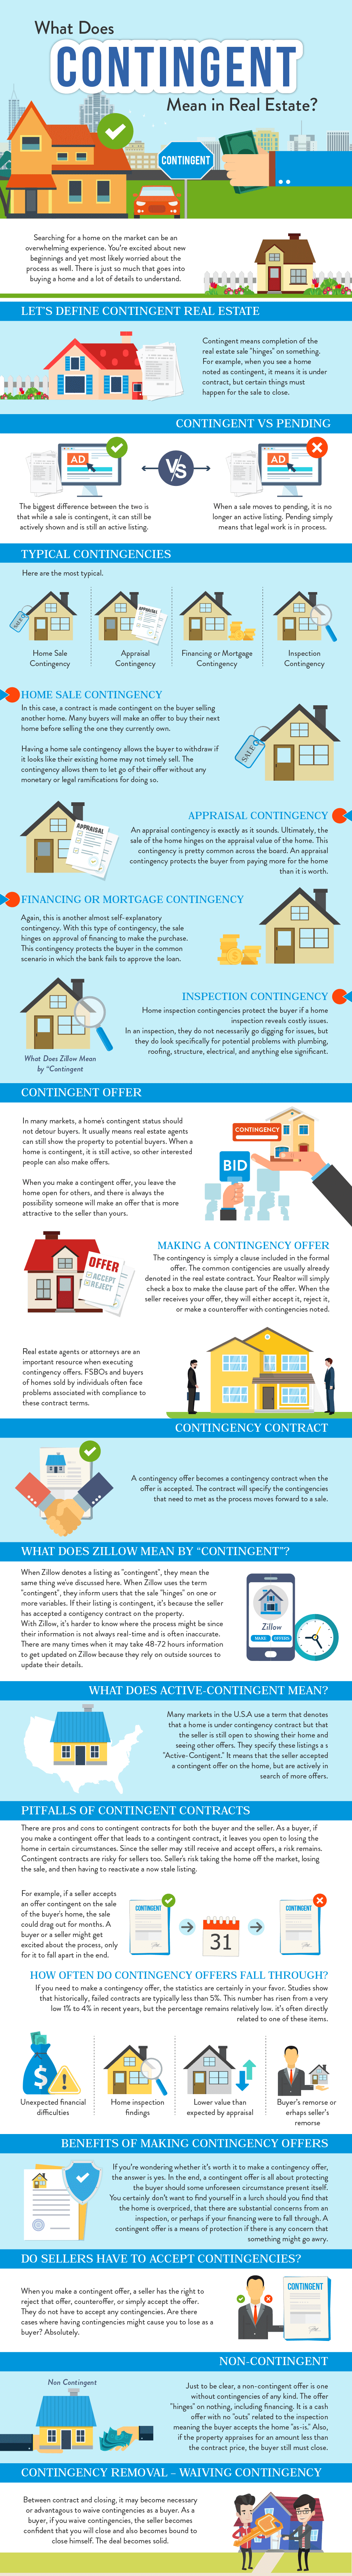 Contingent in real estate infographic